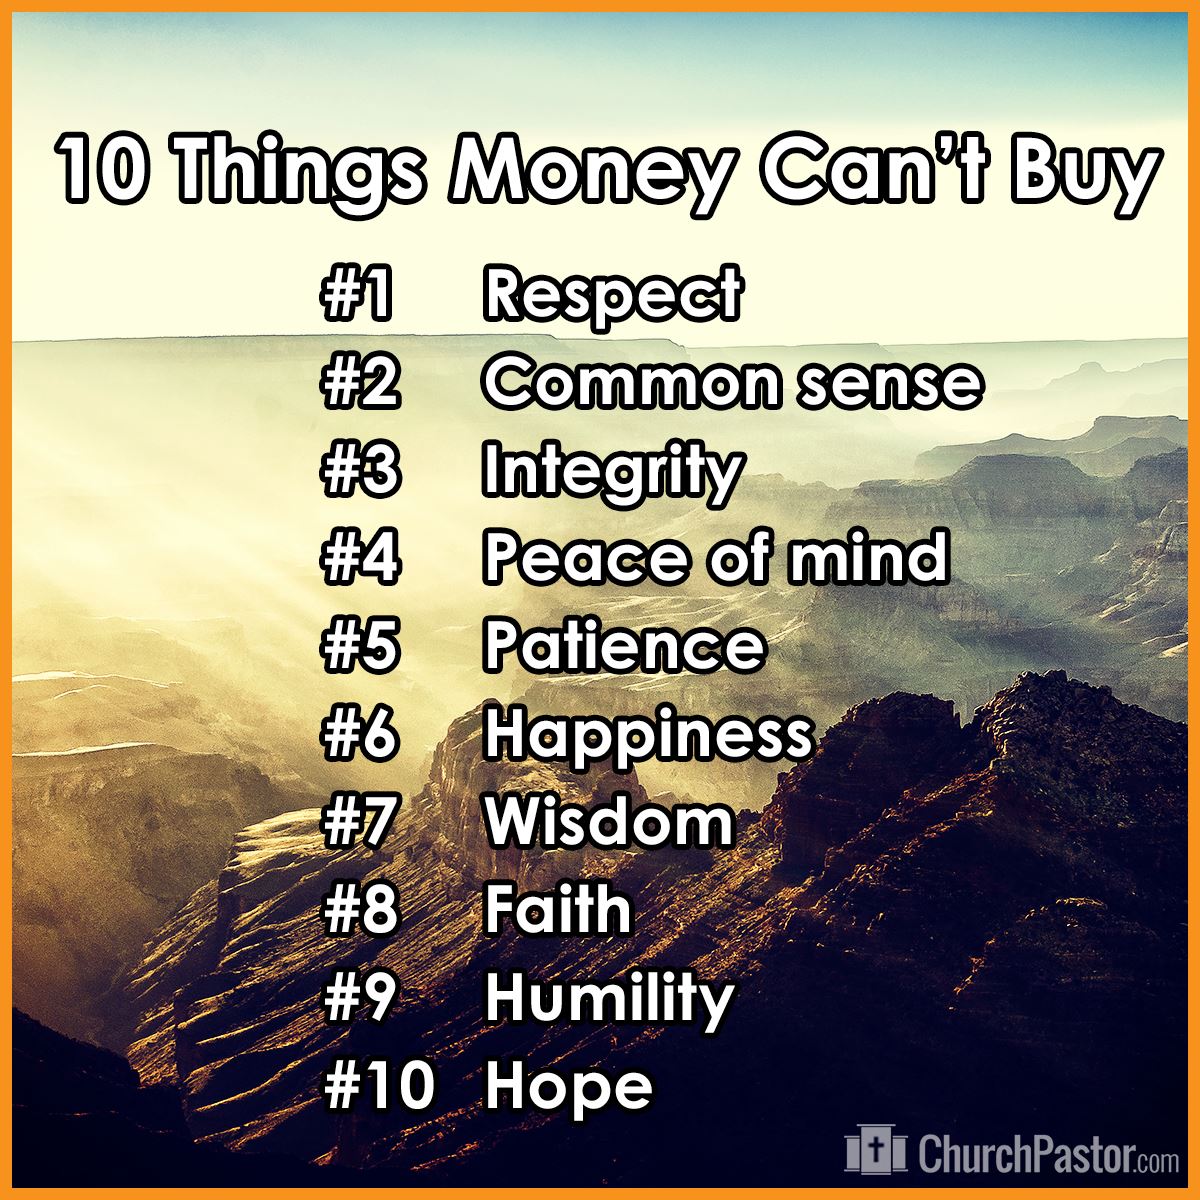 10 things that money can't buy, respect, common sense, integrity, peace of mind, patience, happiness, wisdom, faith, humility, hope